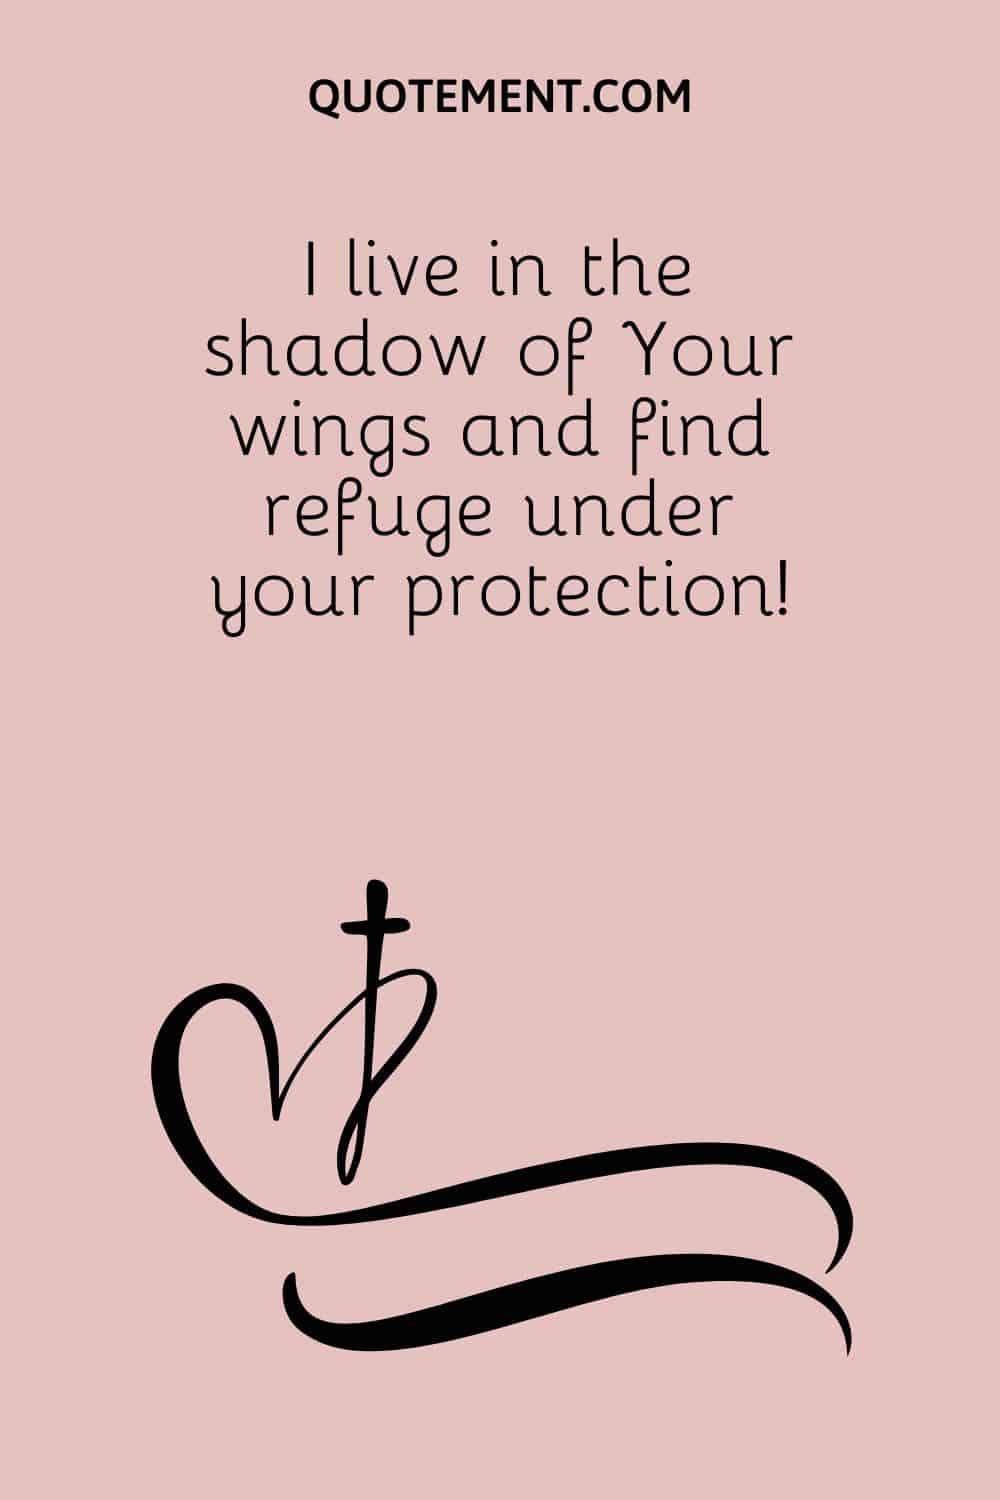 I live in the shadow of Your wings and find refuge under your protection